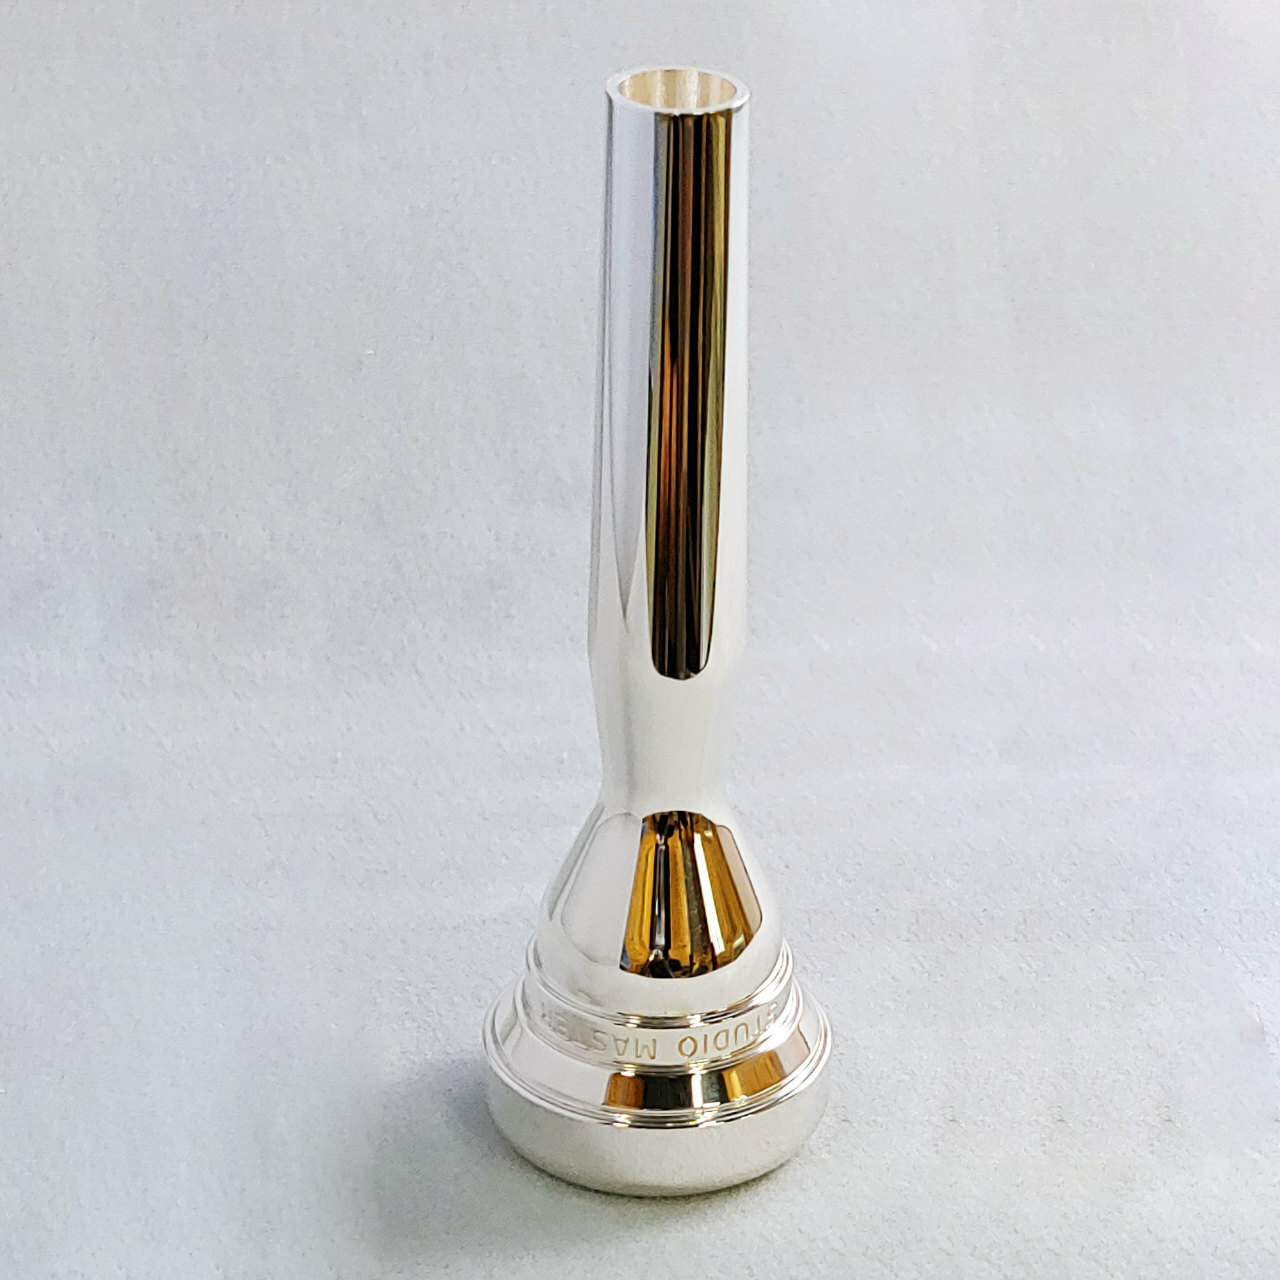 Trumpet Archives - Stork Custom Mouthpieces